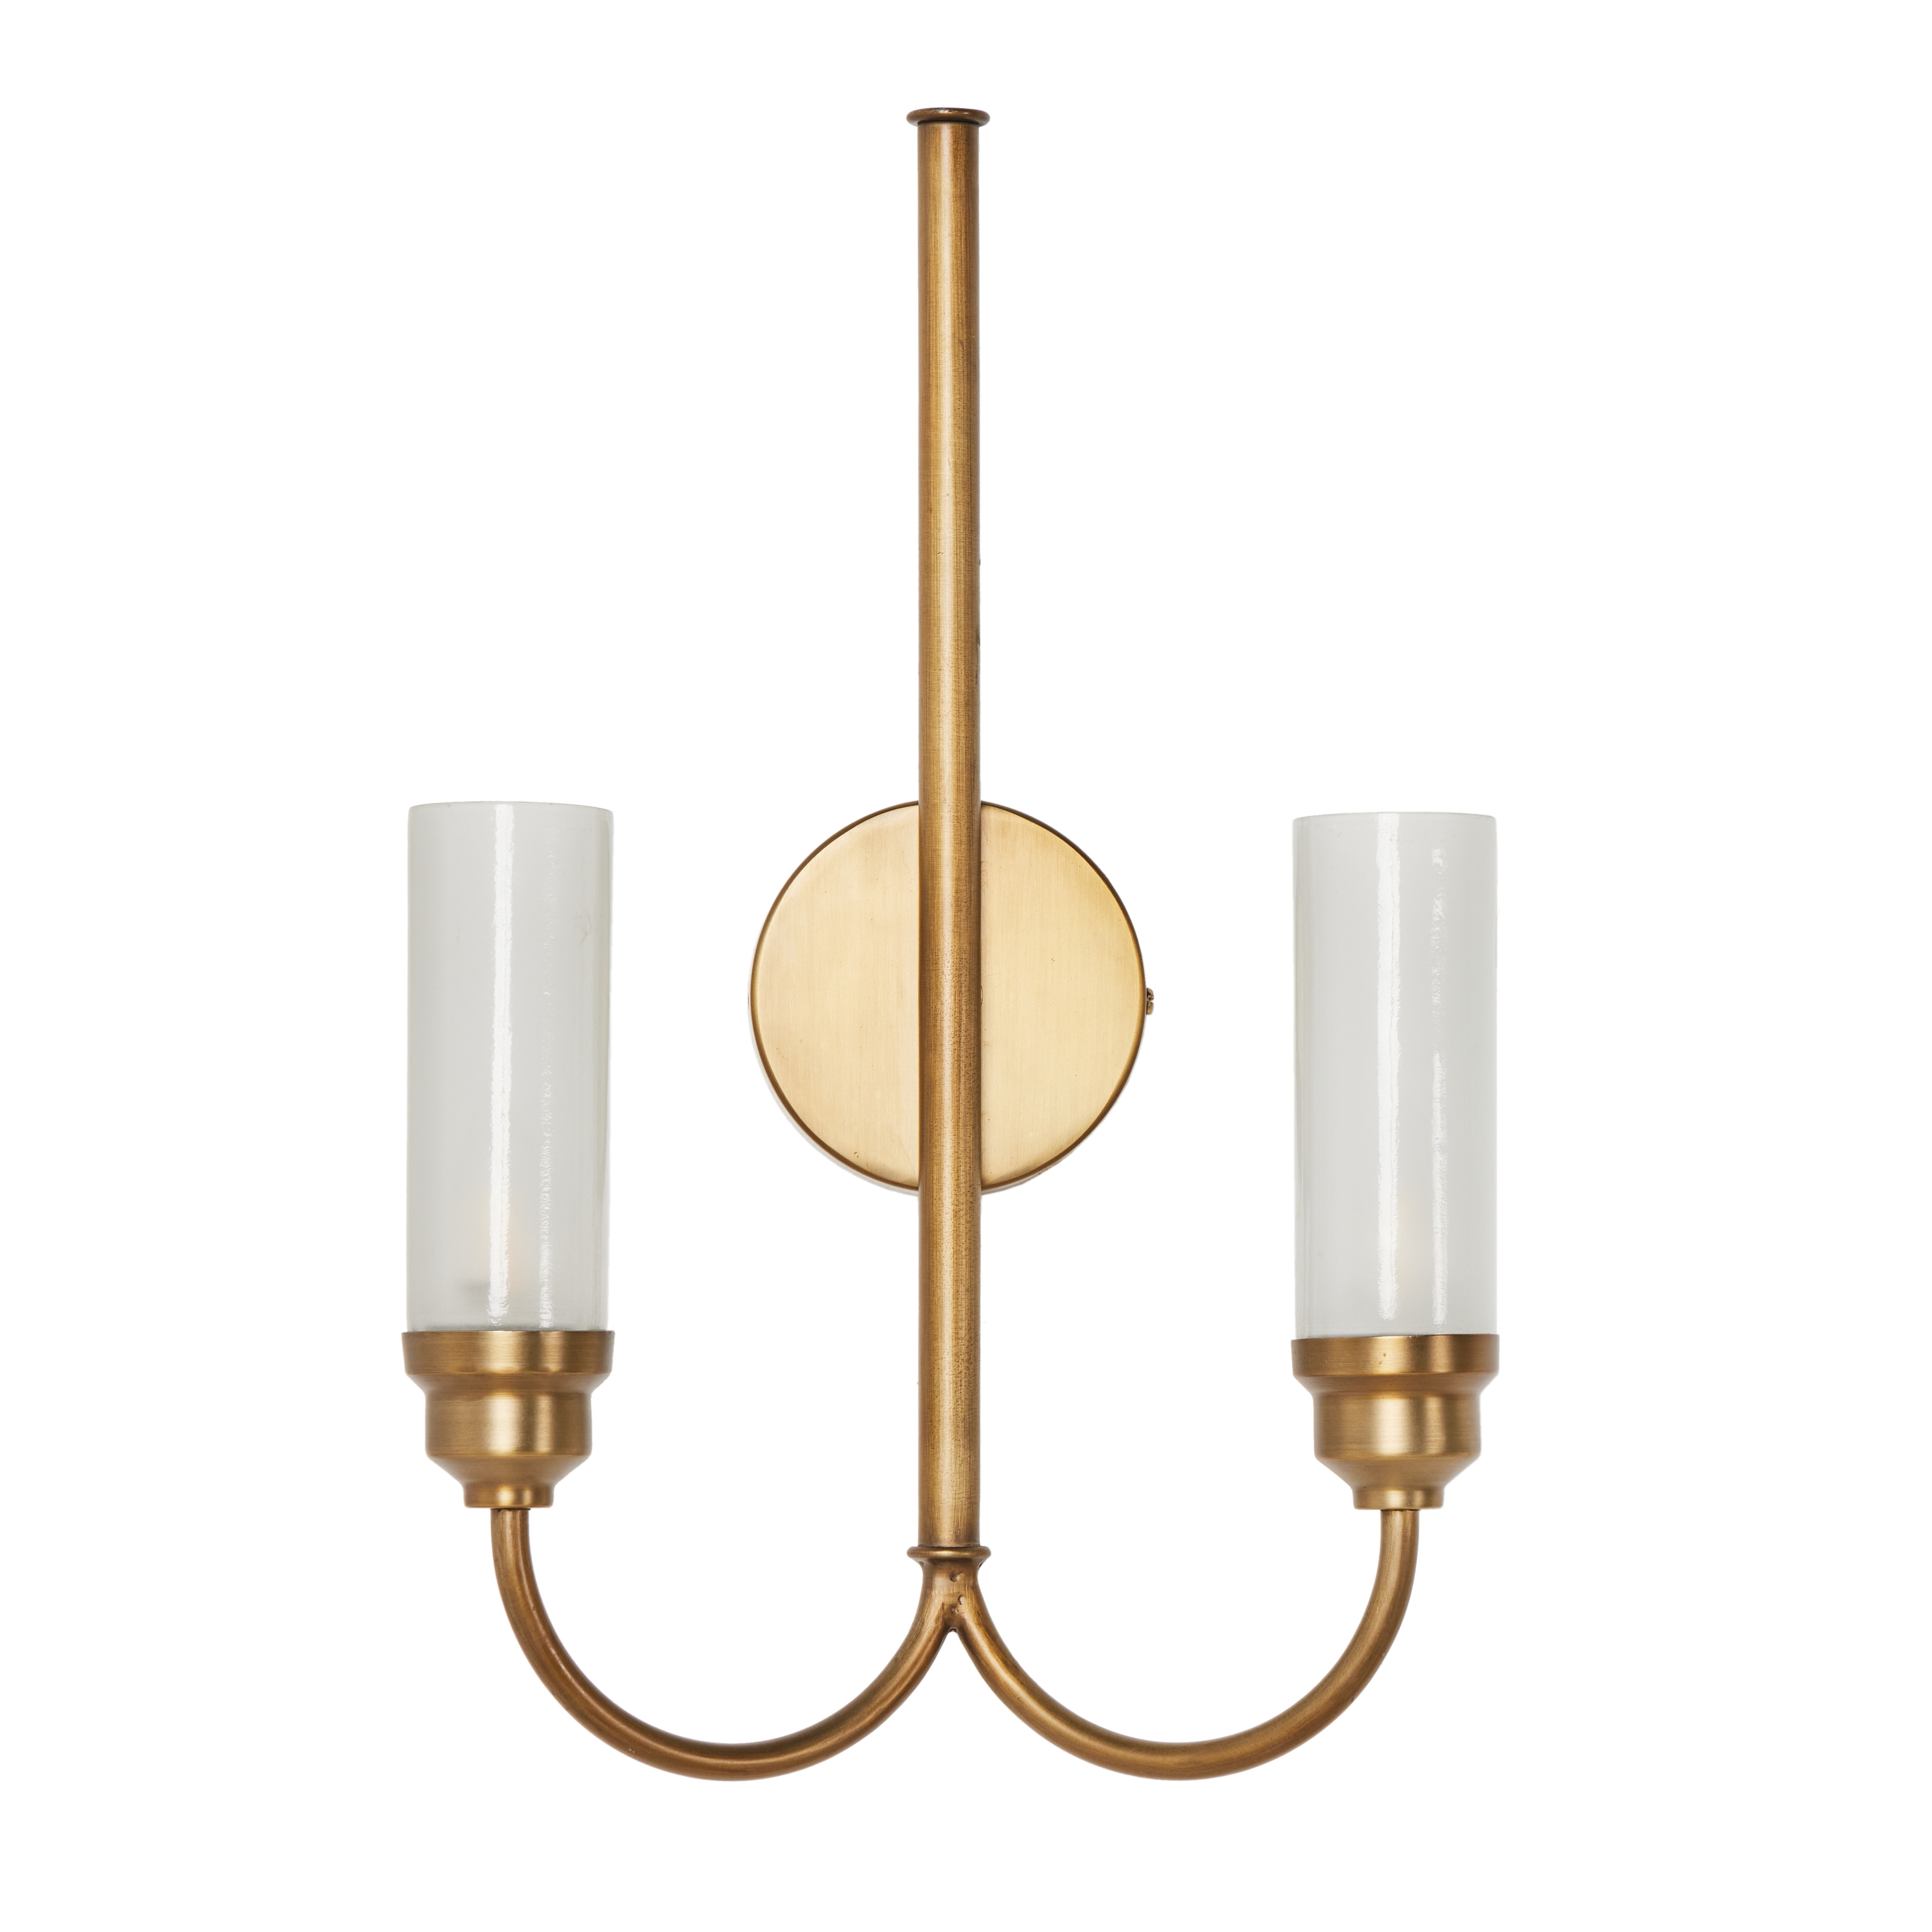 Darby Sconce-Antique Brass Iron - Image 5